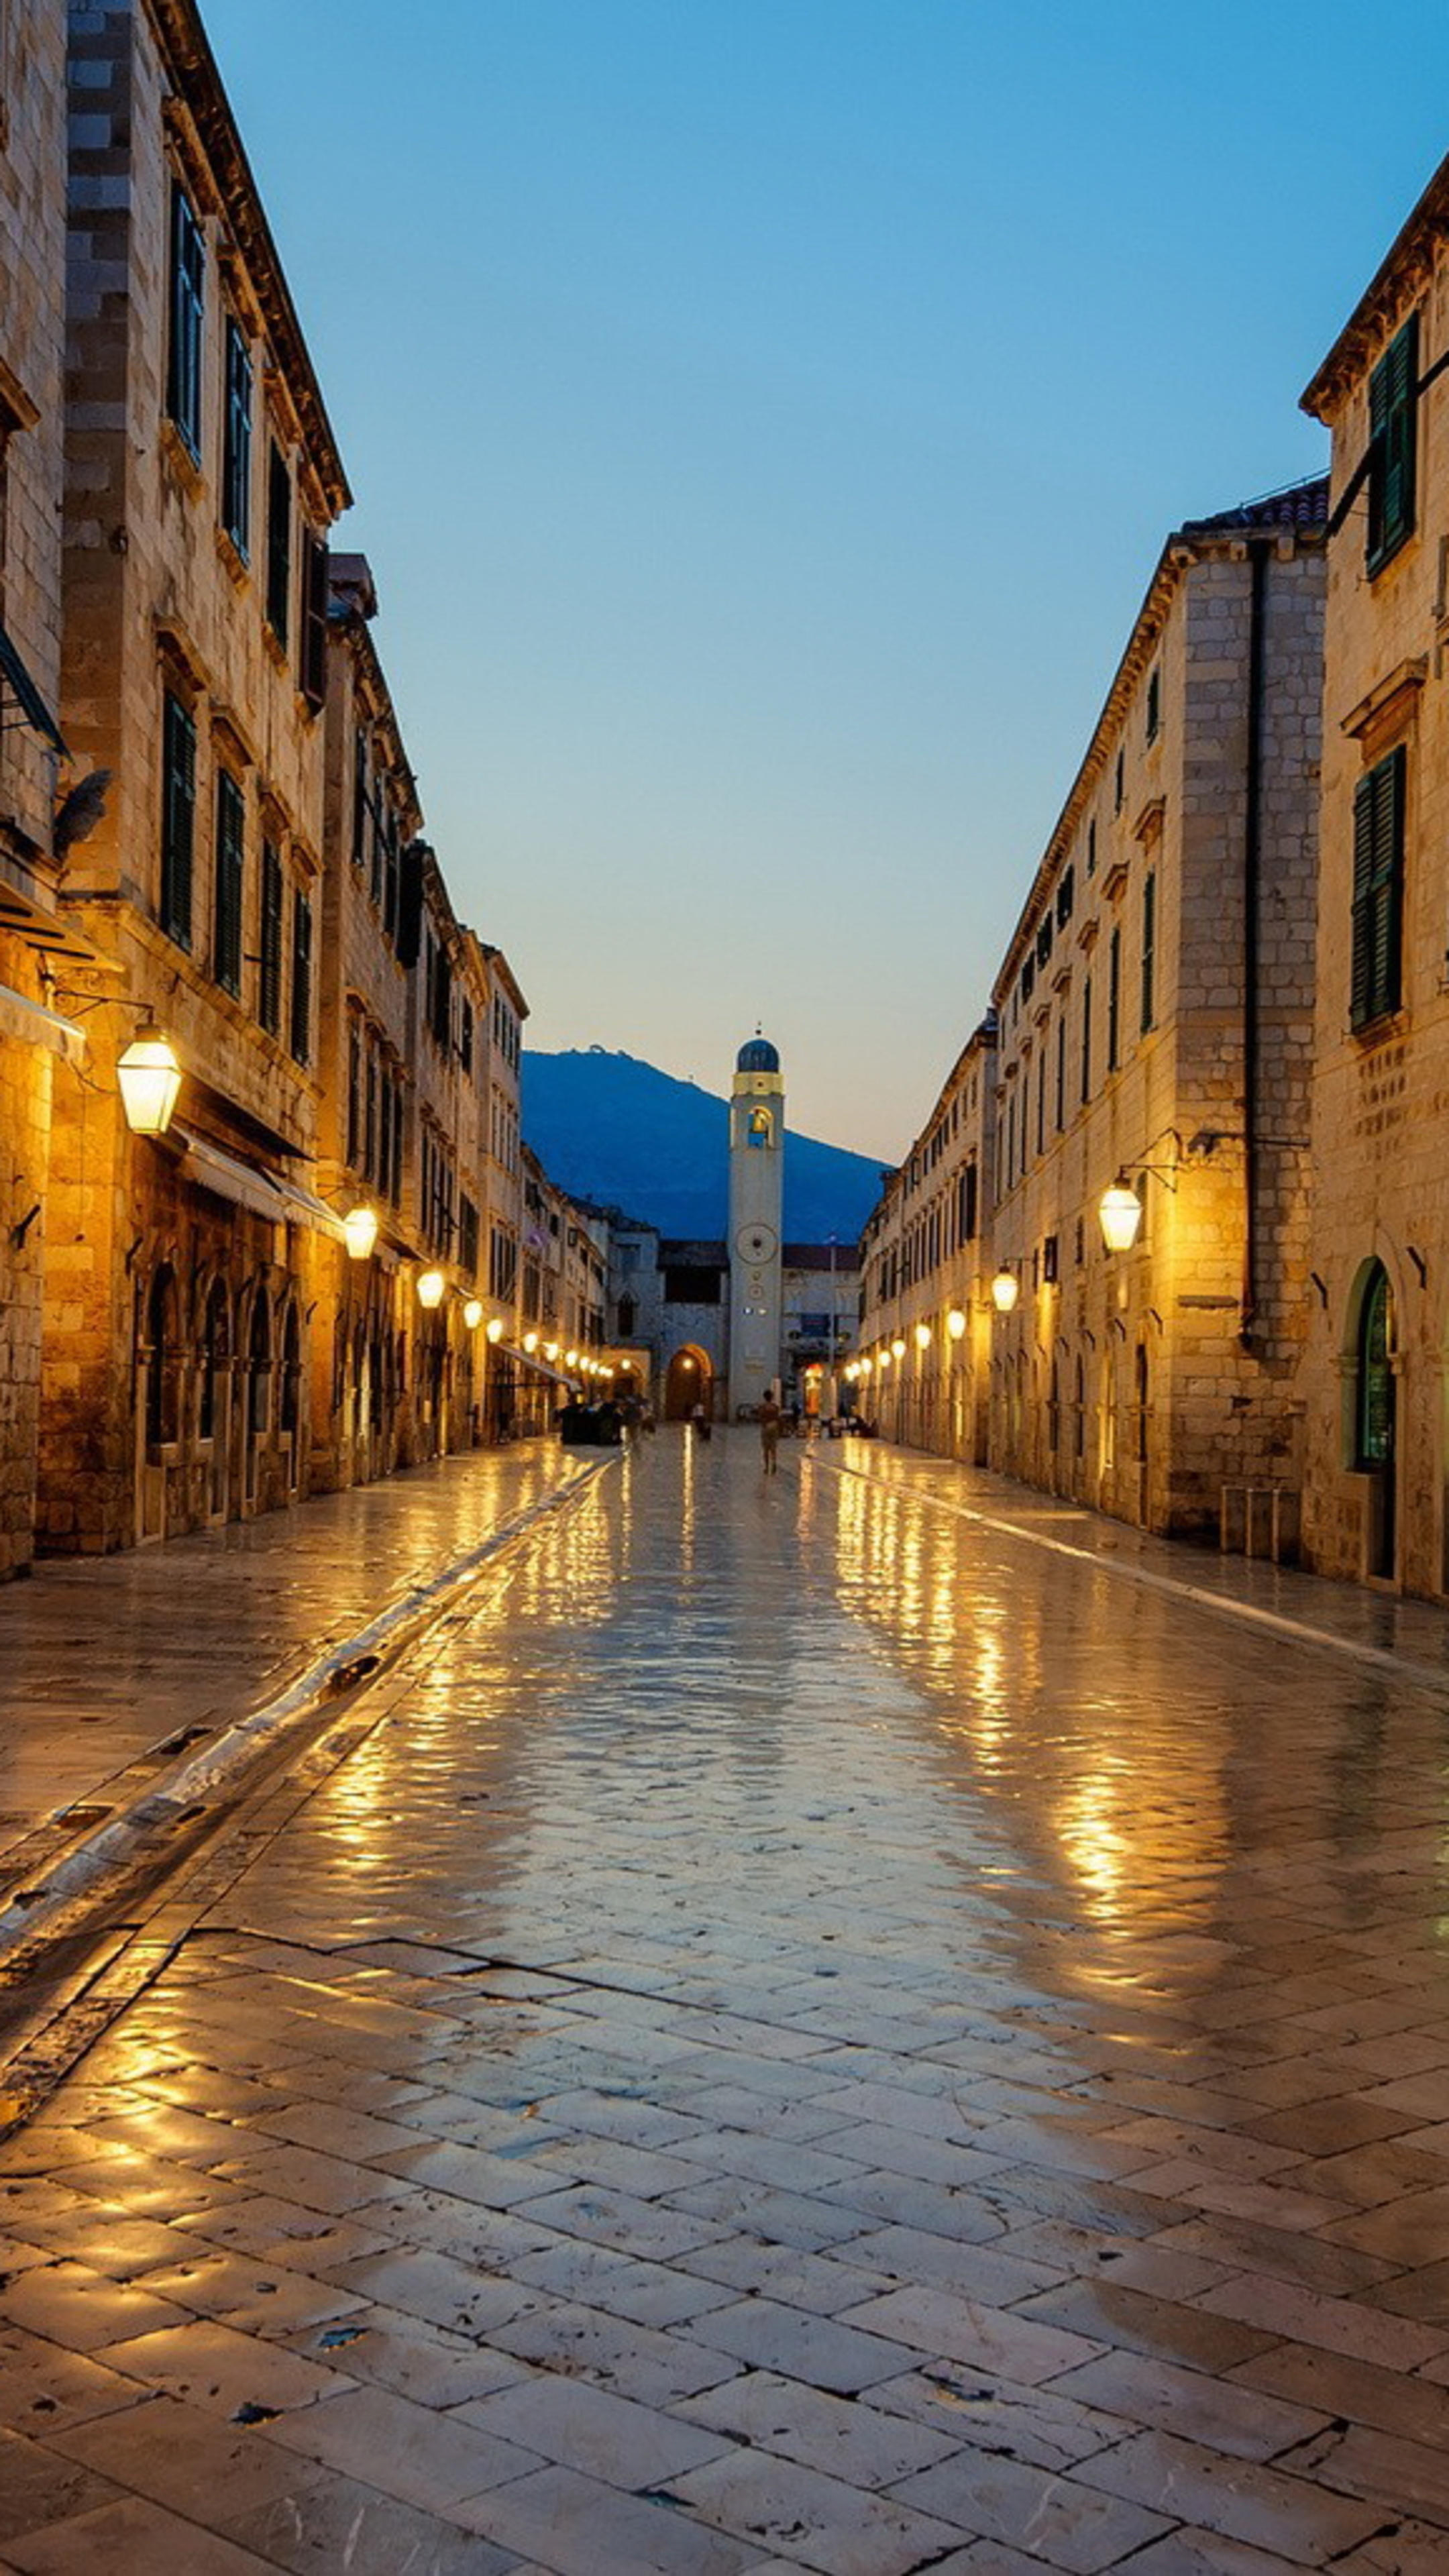 Alley: The old Dubrovnik city streets, Ragusa city on the Adriatic sea, Croatia. 2160x3840 4K Wallpaper.